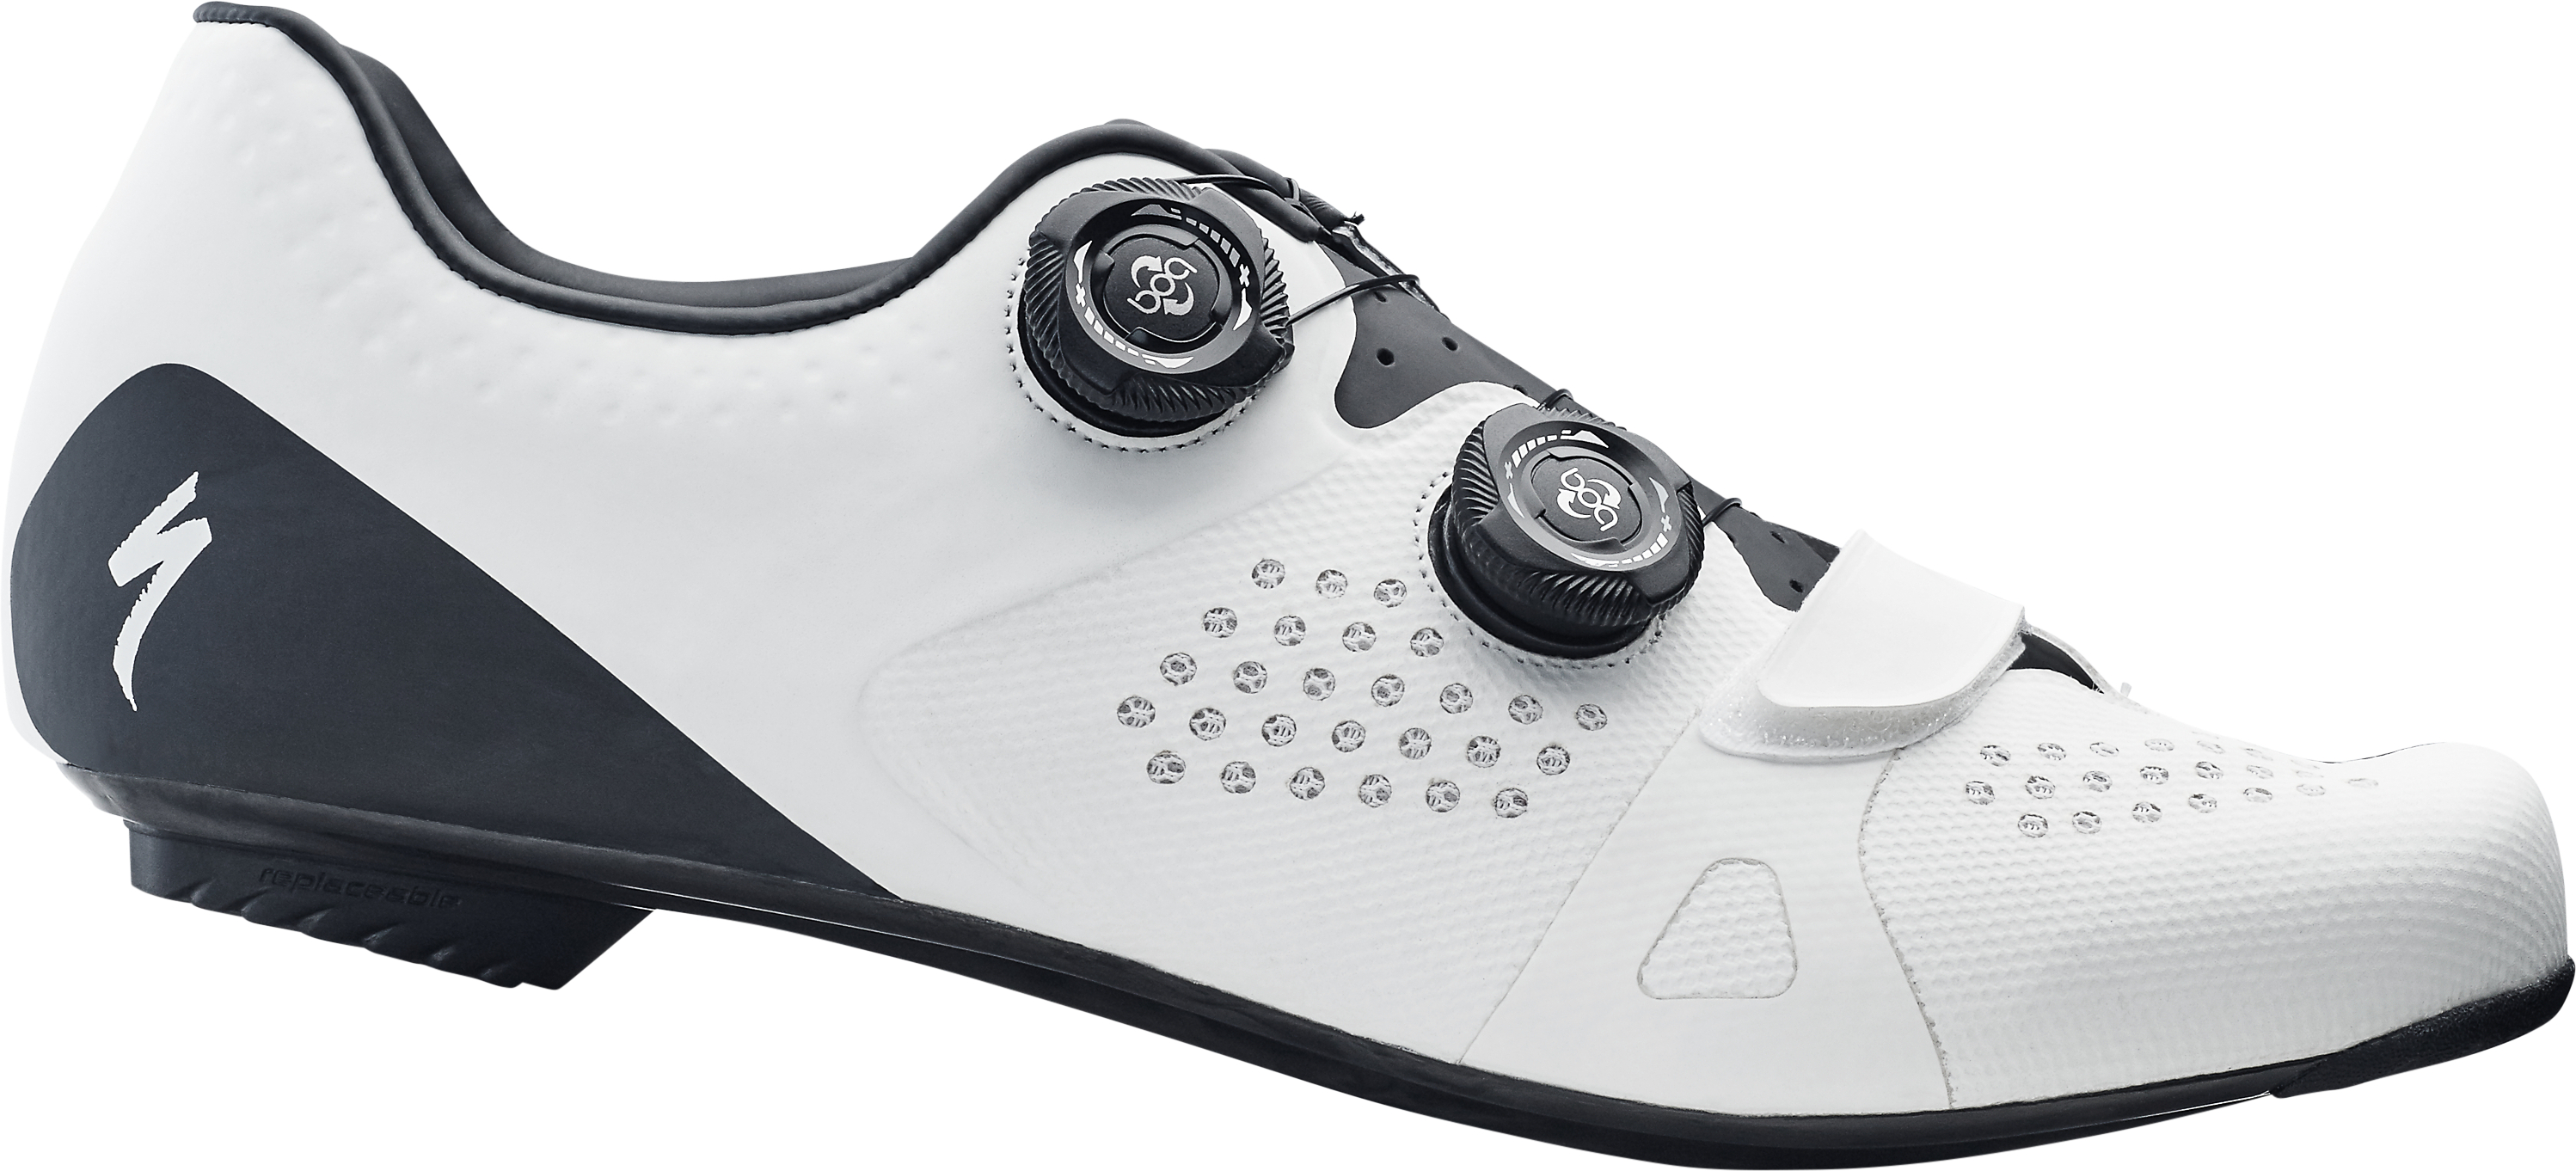 Specialized  Torch 3.0 Road Cycling Shoes 46 White